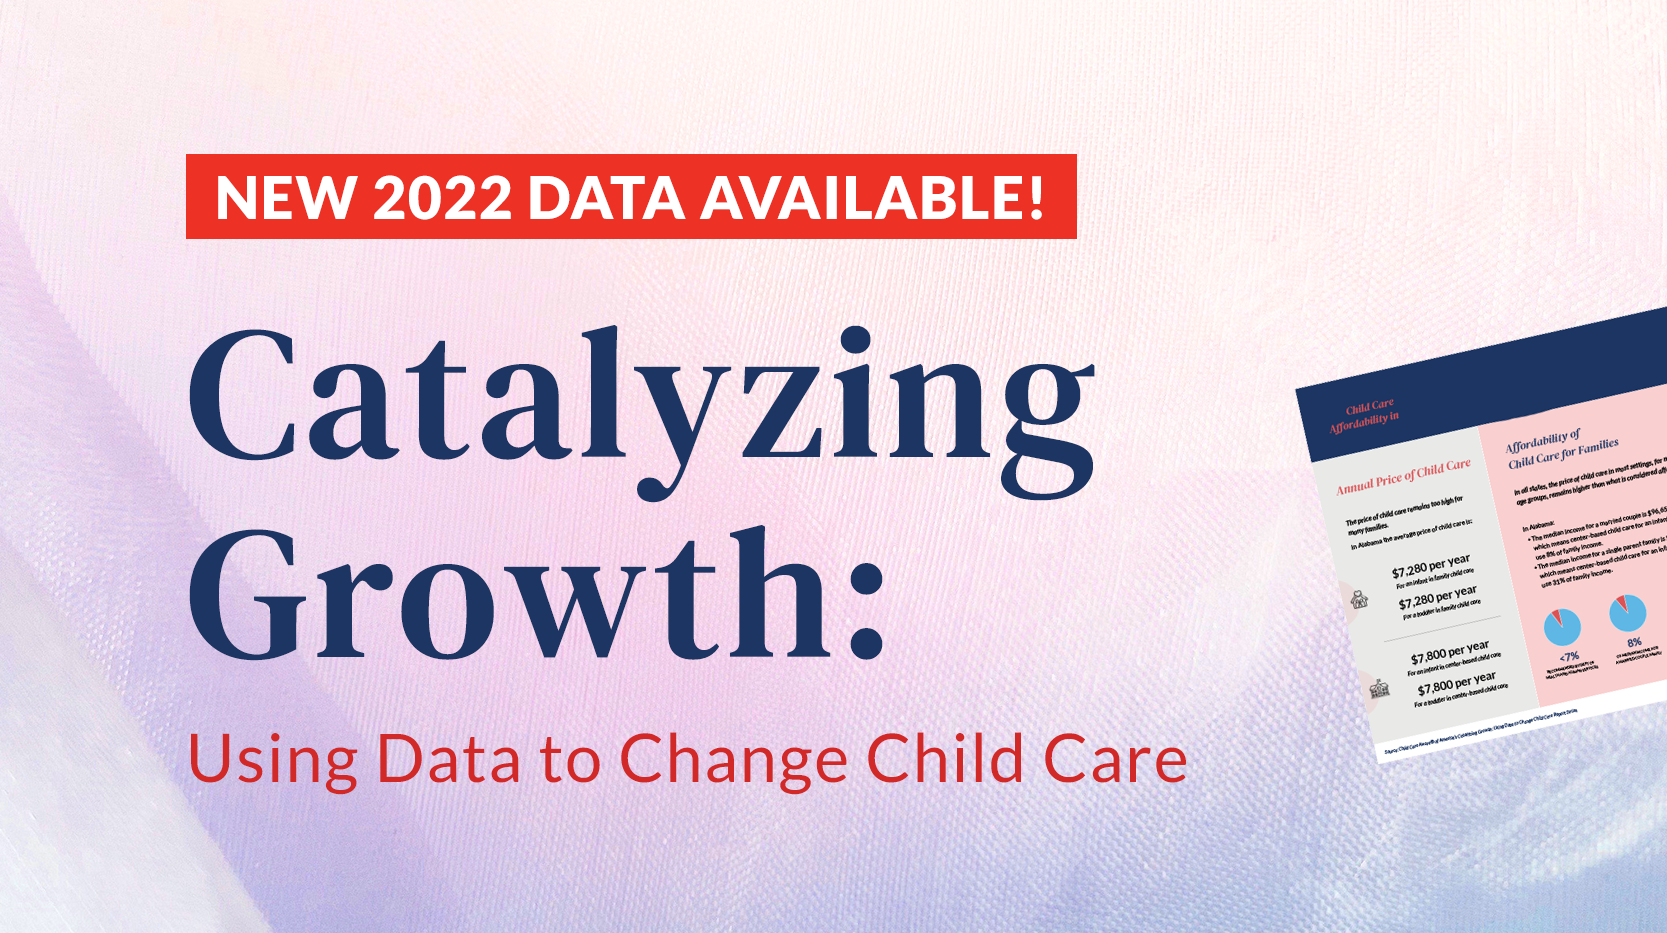 Child Care Aware® of America’s latest report shows that child care sector supply increased on the heels of over $50b investment